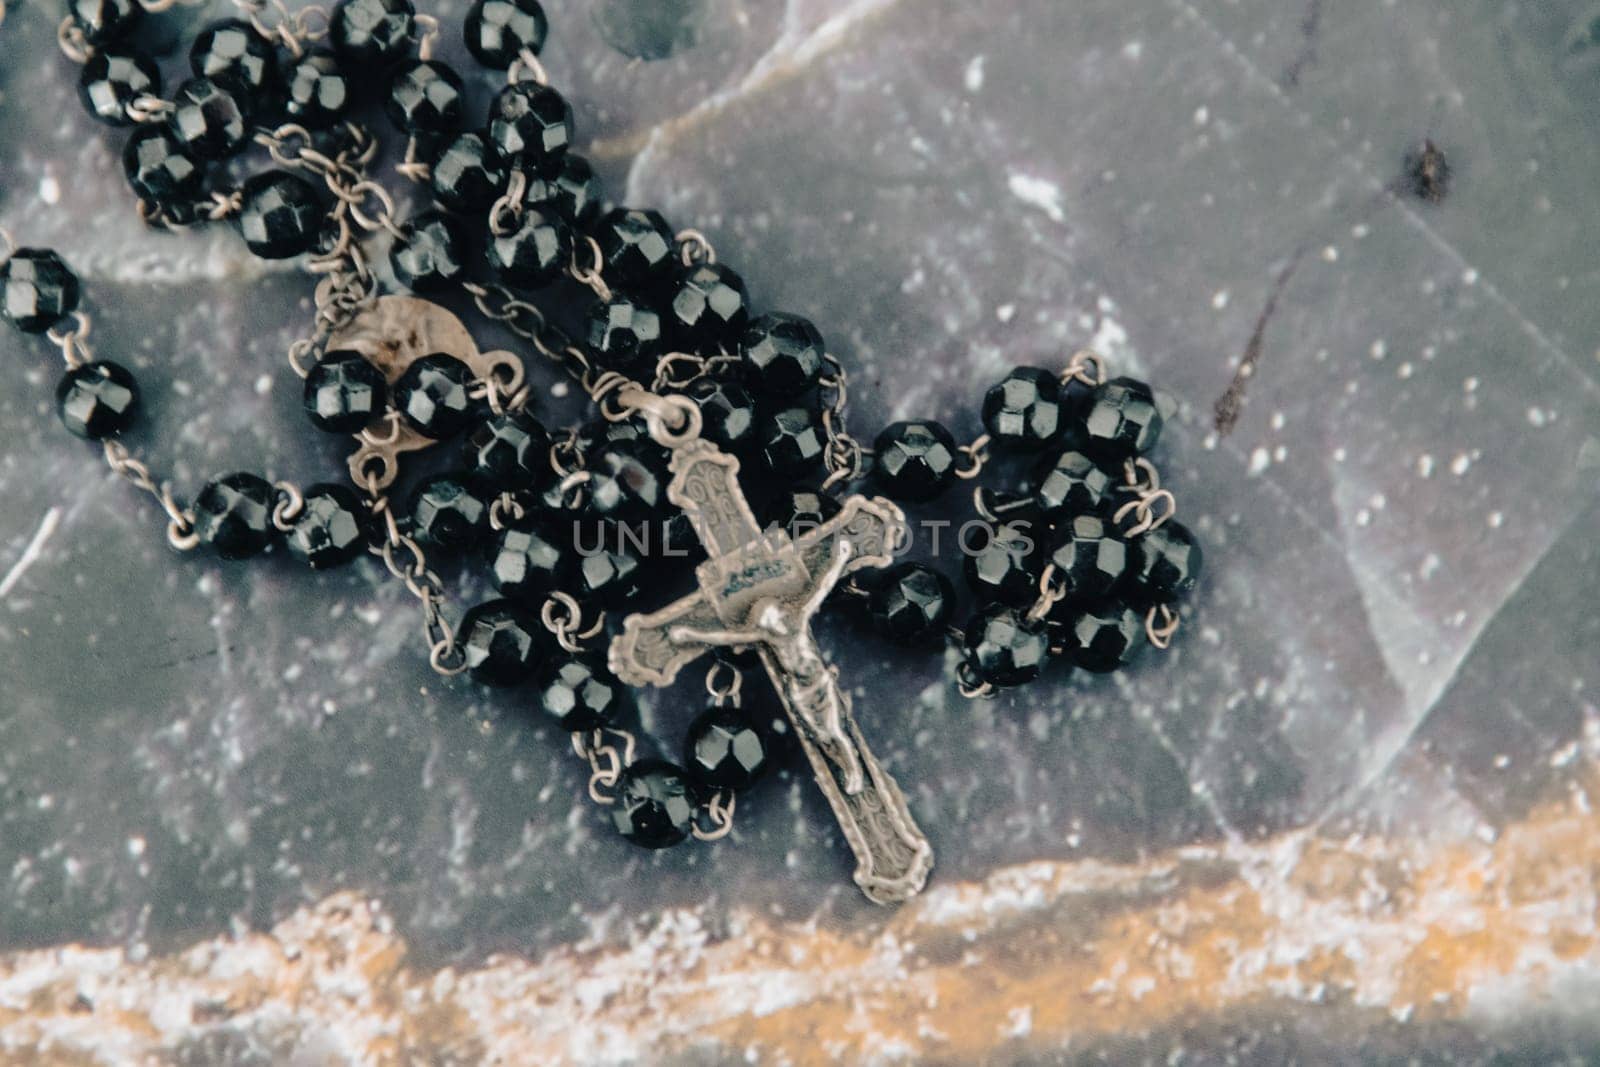 A close-up shot of a black beaded rosary and crucifix, symbolizing faith and spirituality